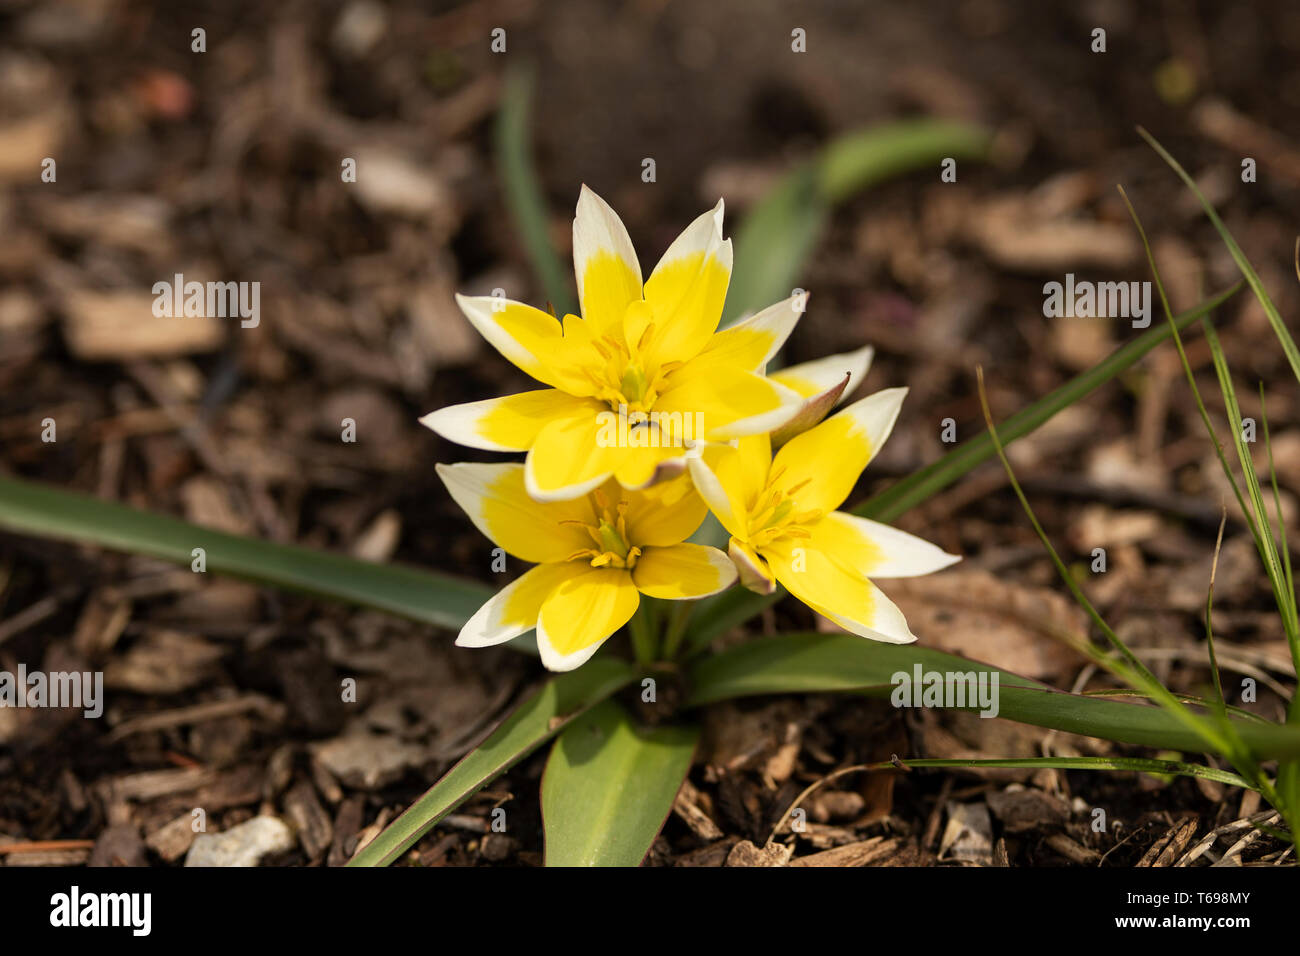 Late Tulip Tulipa Tarda Or Tarda Tulip Native To Central Asia Blooming In The Spring The Yellow Petals Have White Tips Stock Photo Alamy